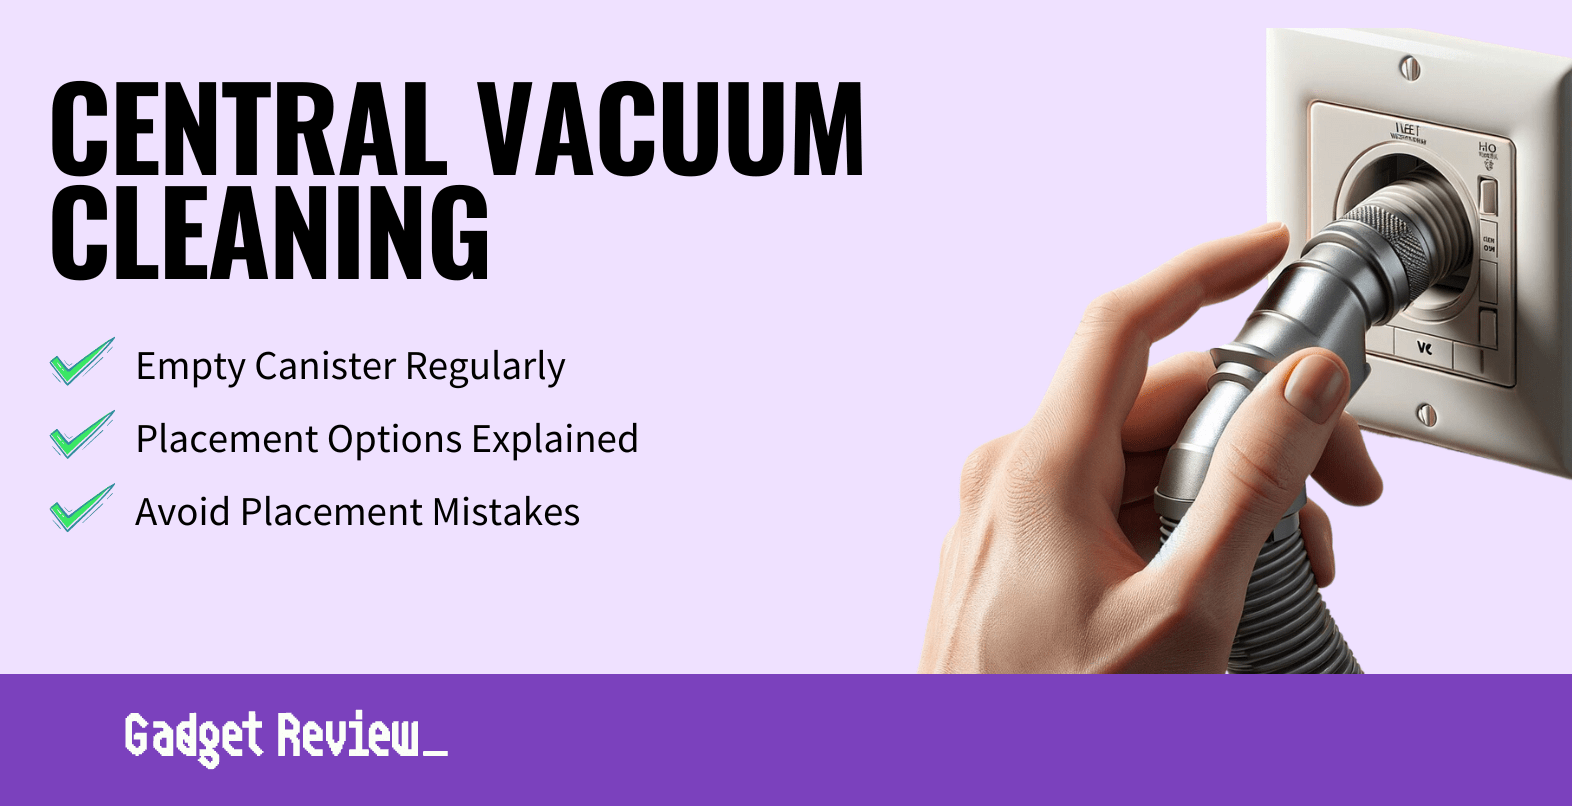 How to Clean a Central Vacuum Cleaner